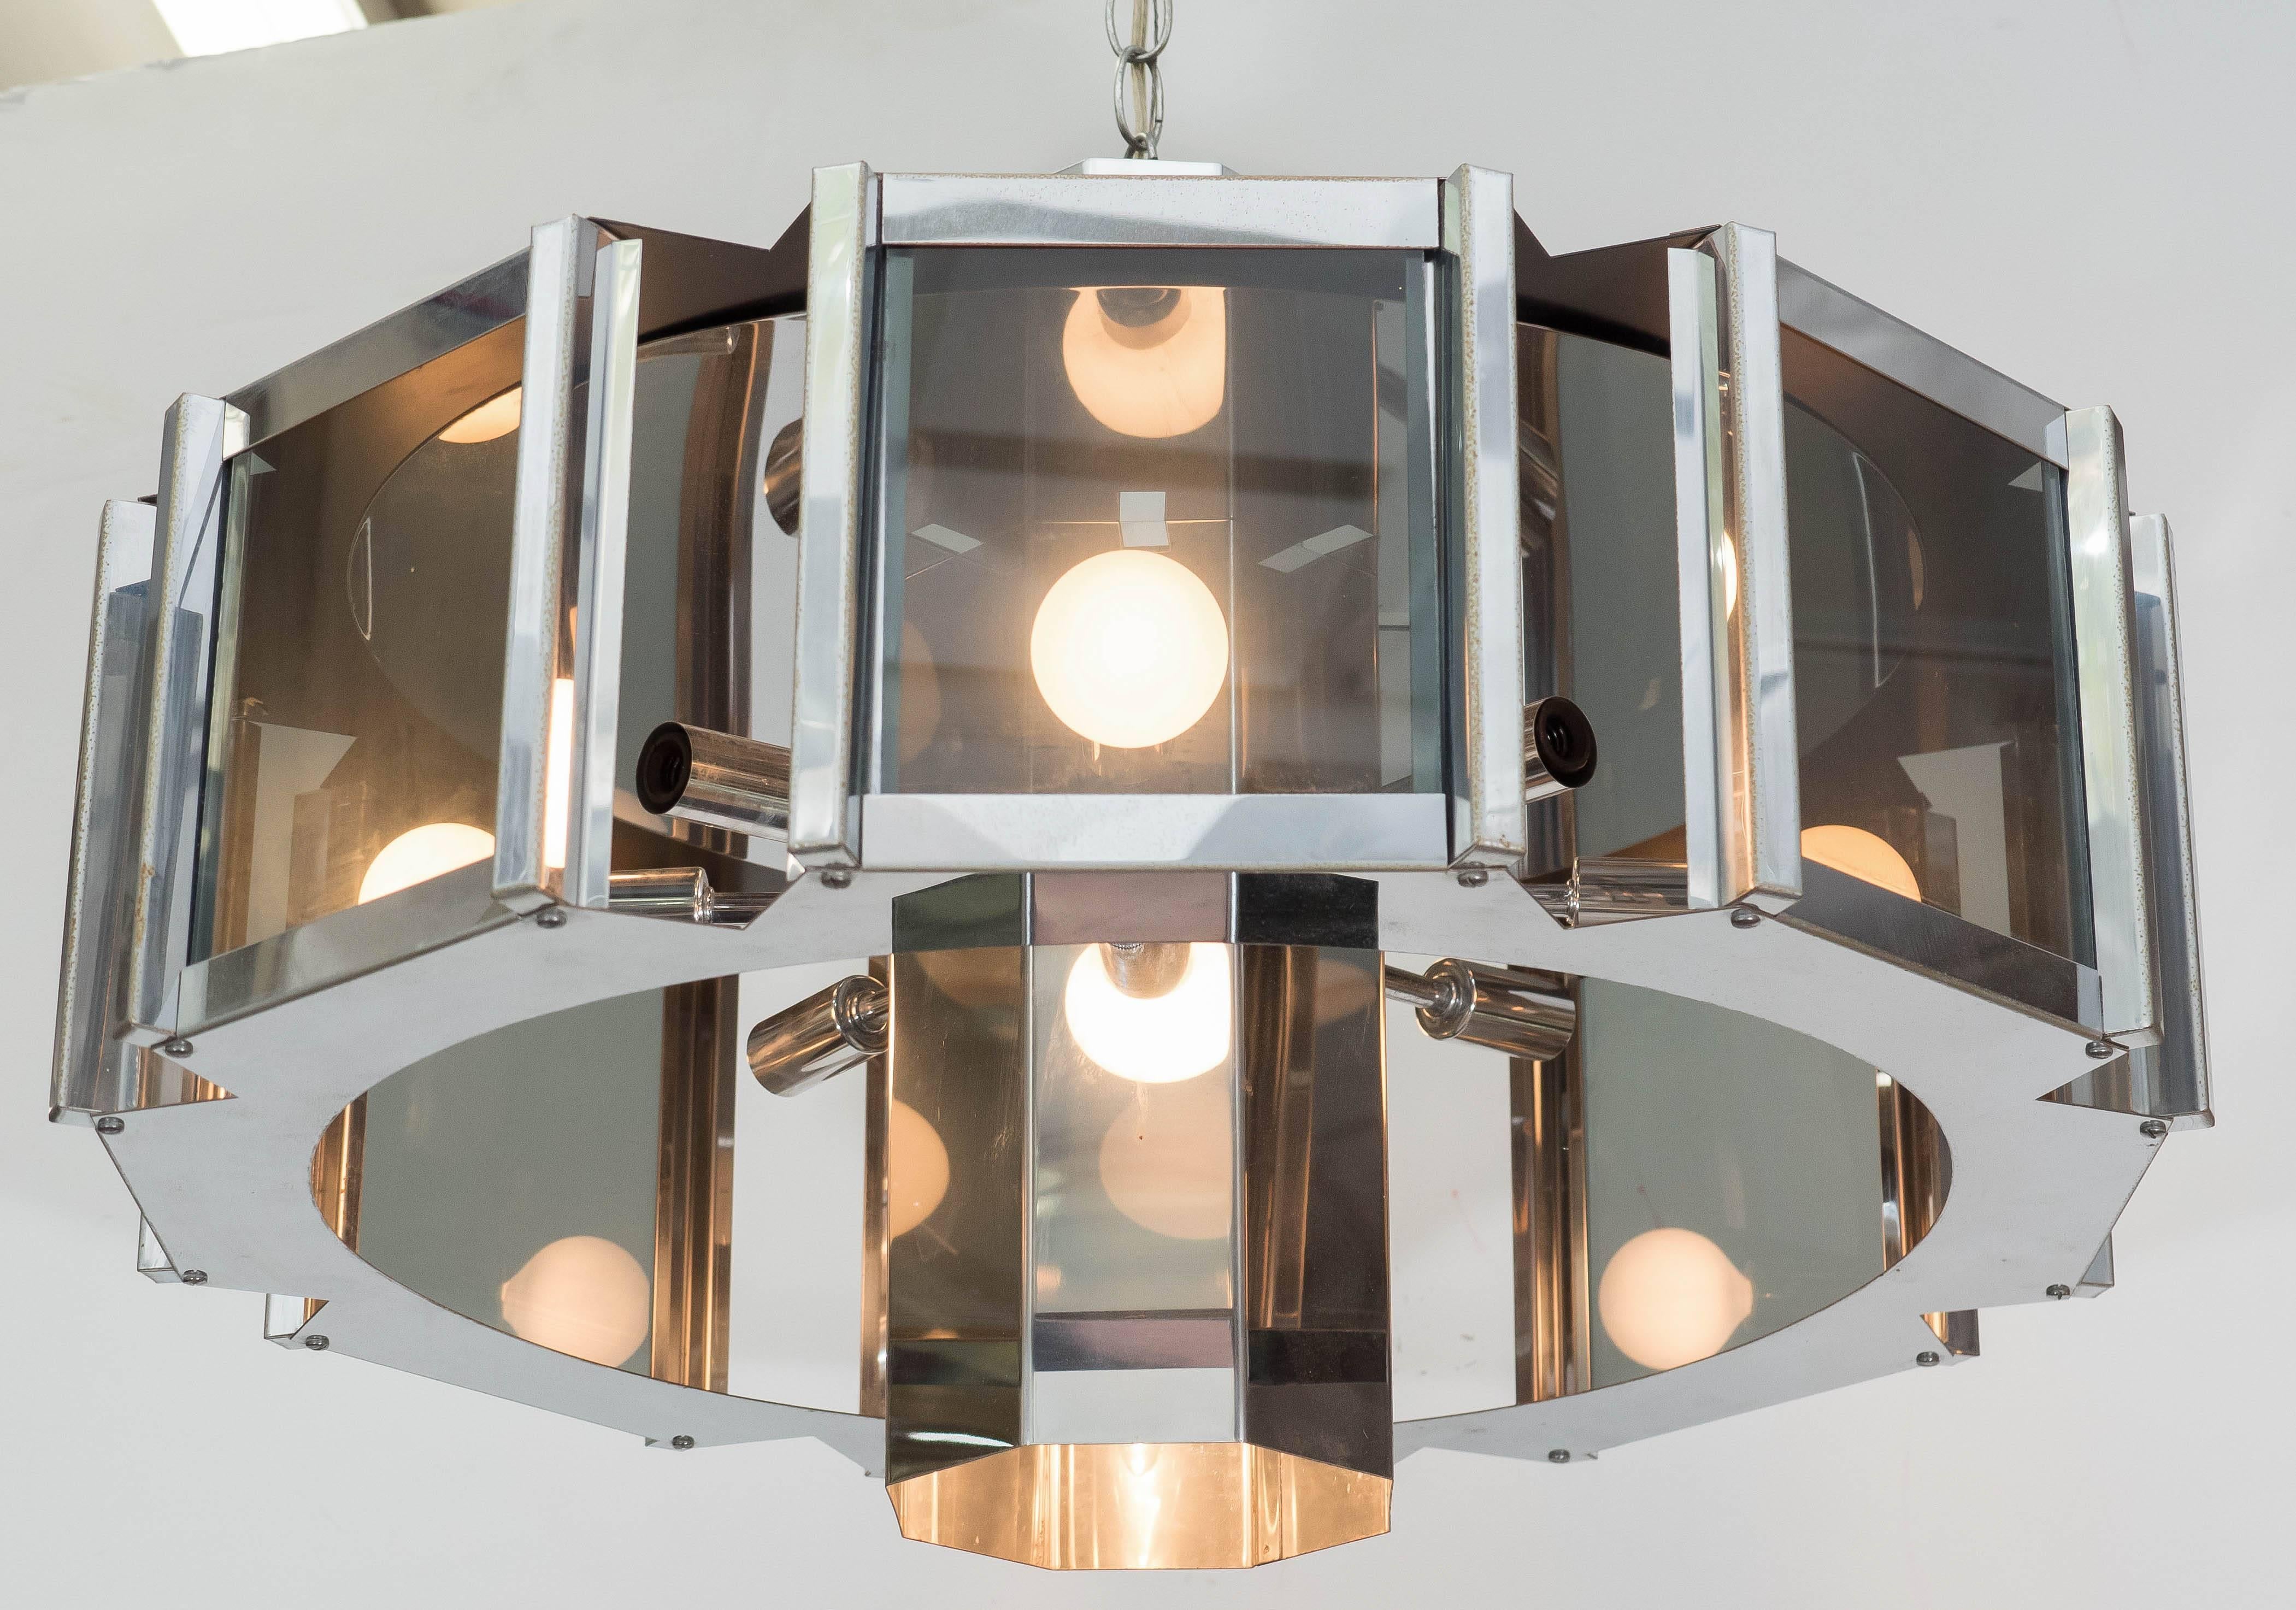 A octagonal chandelier by designer Frederick Ramond, with sockets and reflective cylindrical nucleus echoing the surrounding eight sided chrome frame, inset with smoked glass panels, circa 1980s. This light fixture is in very good condition,